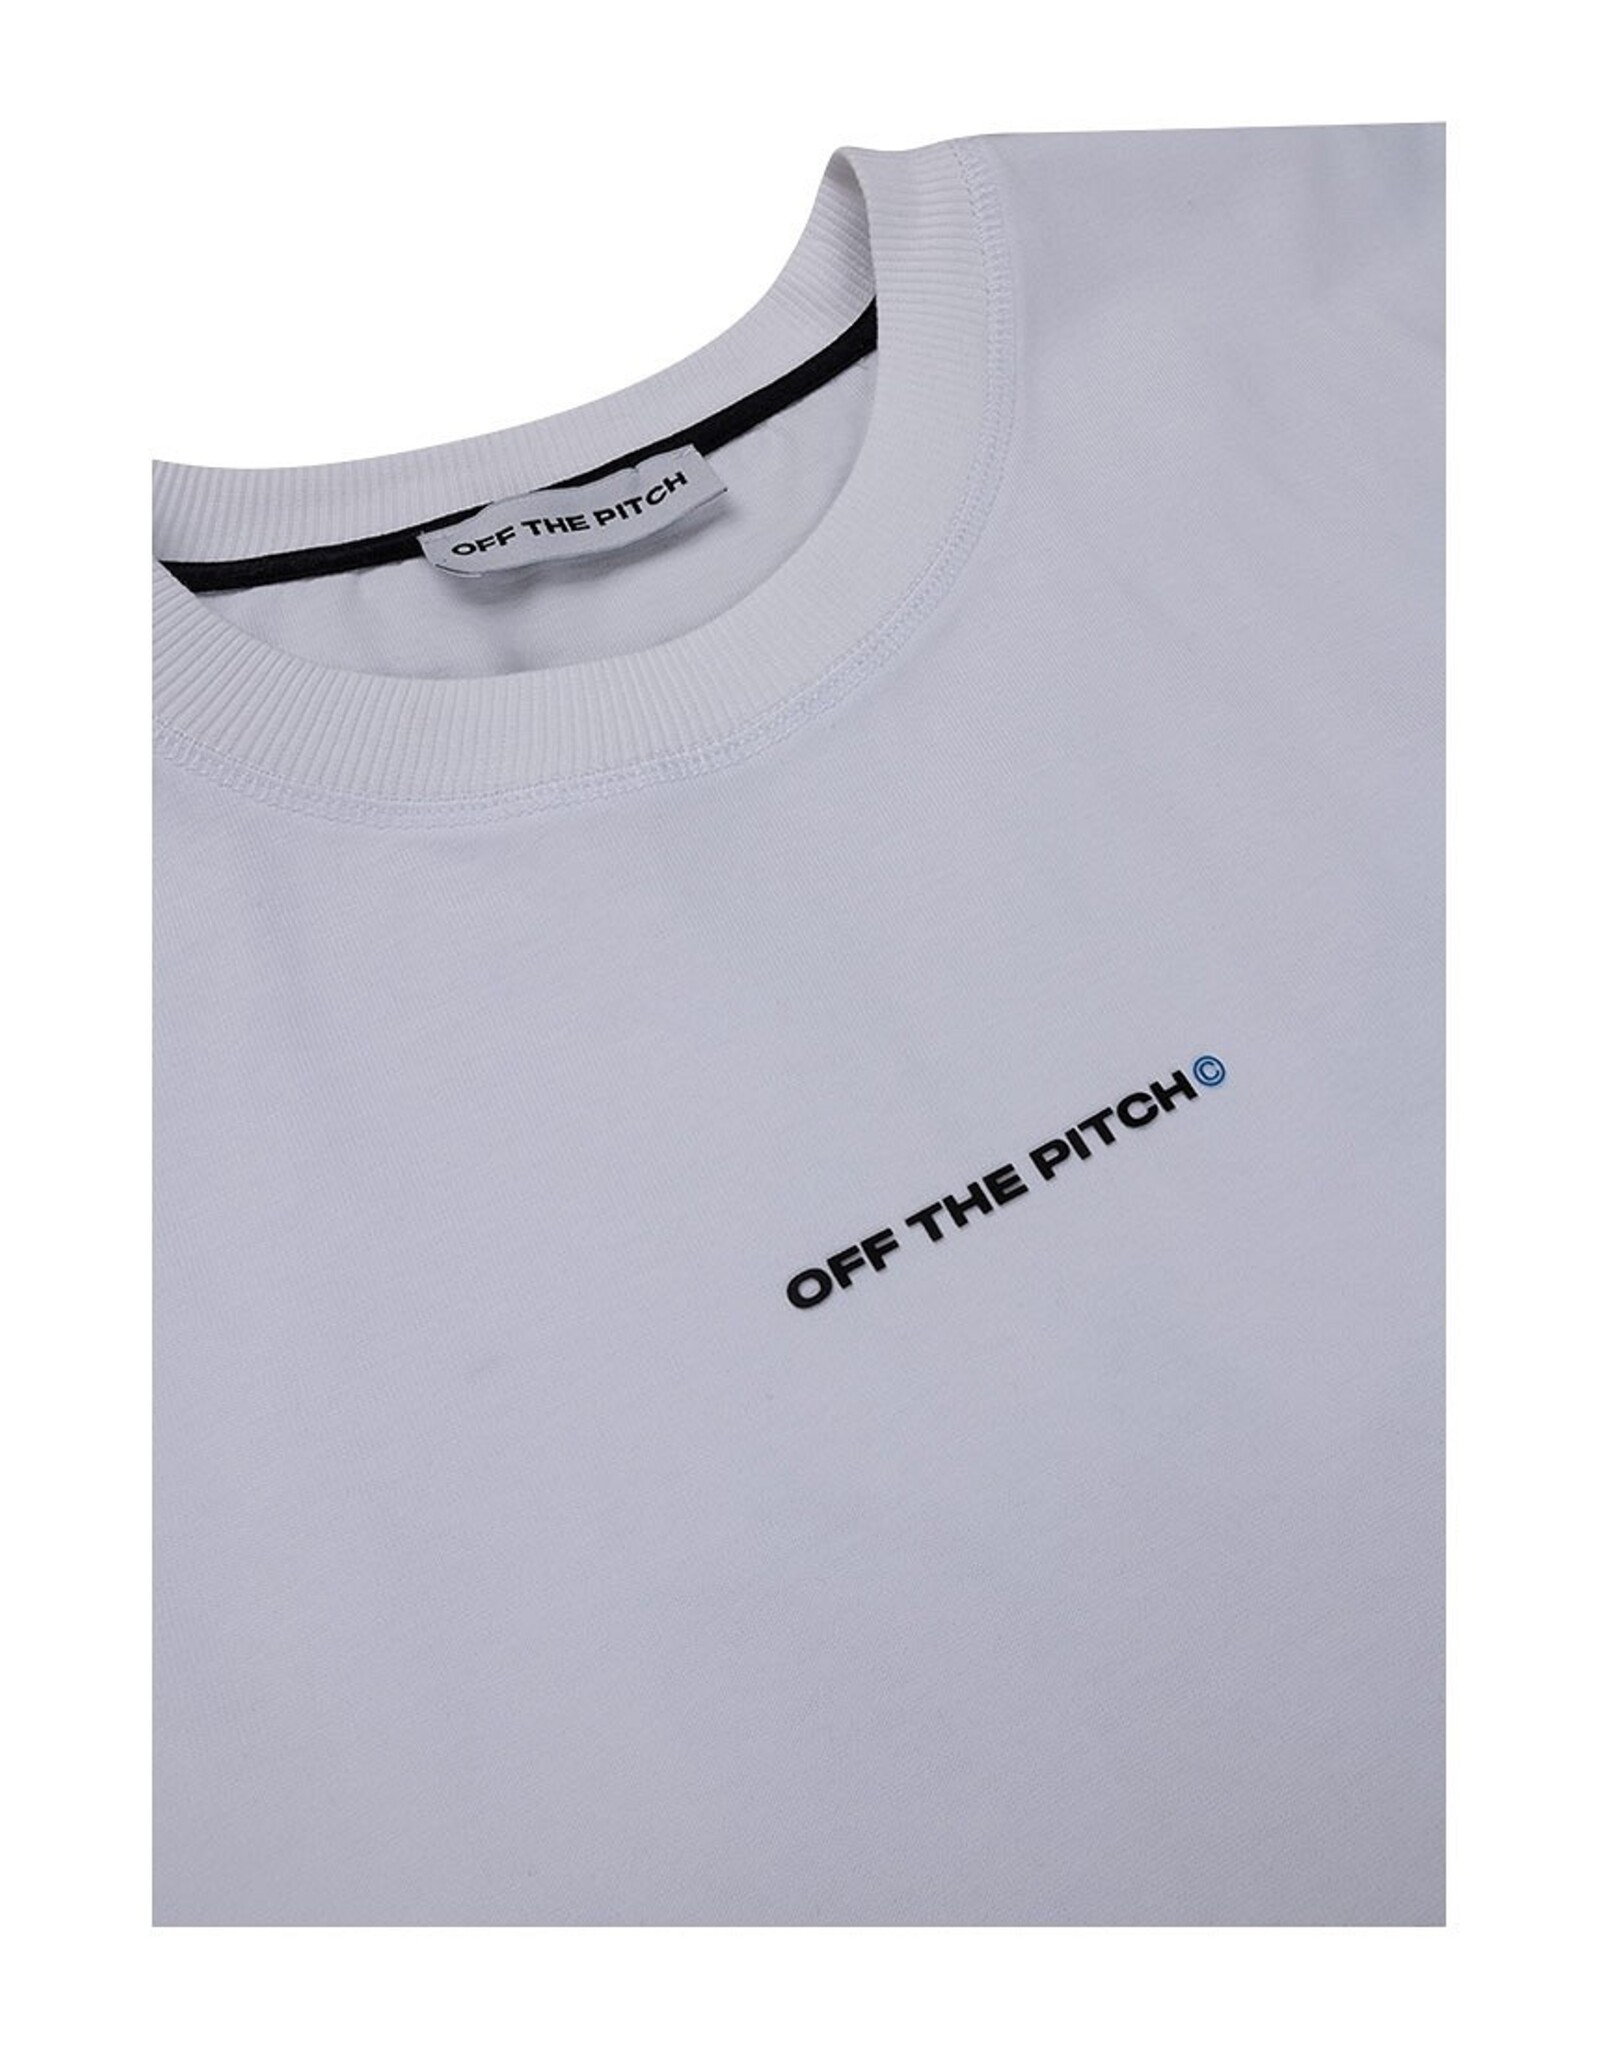 Off the pitch New World tee